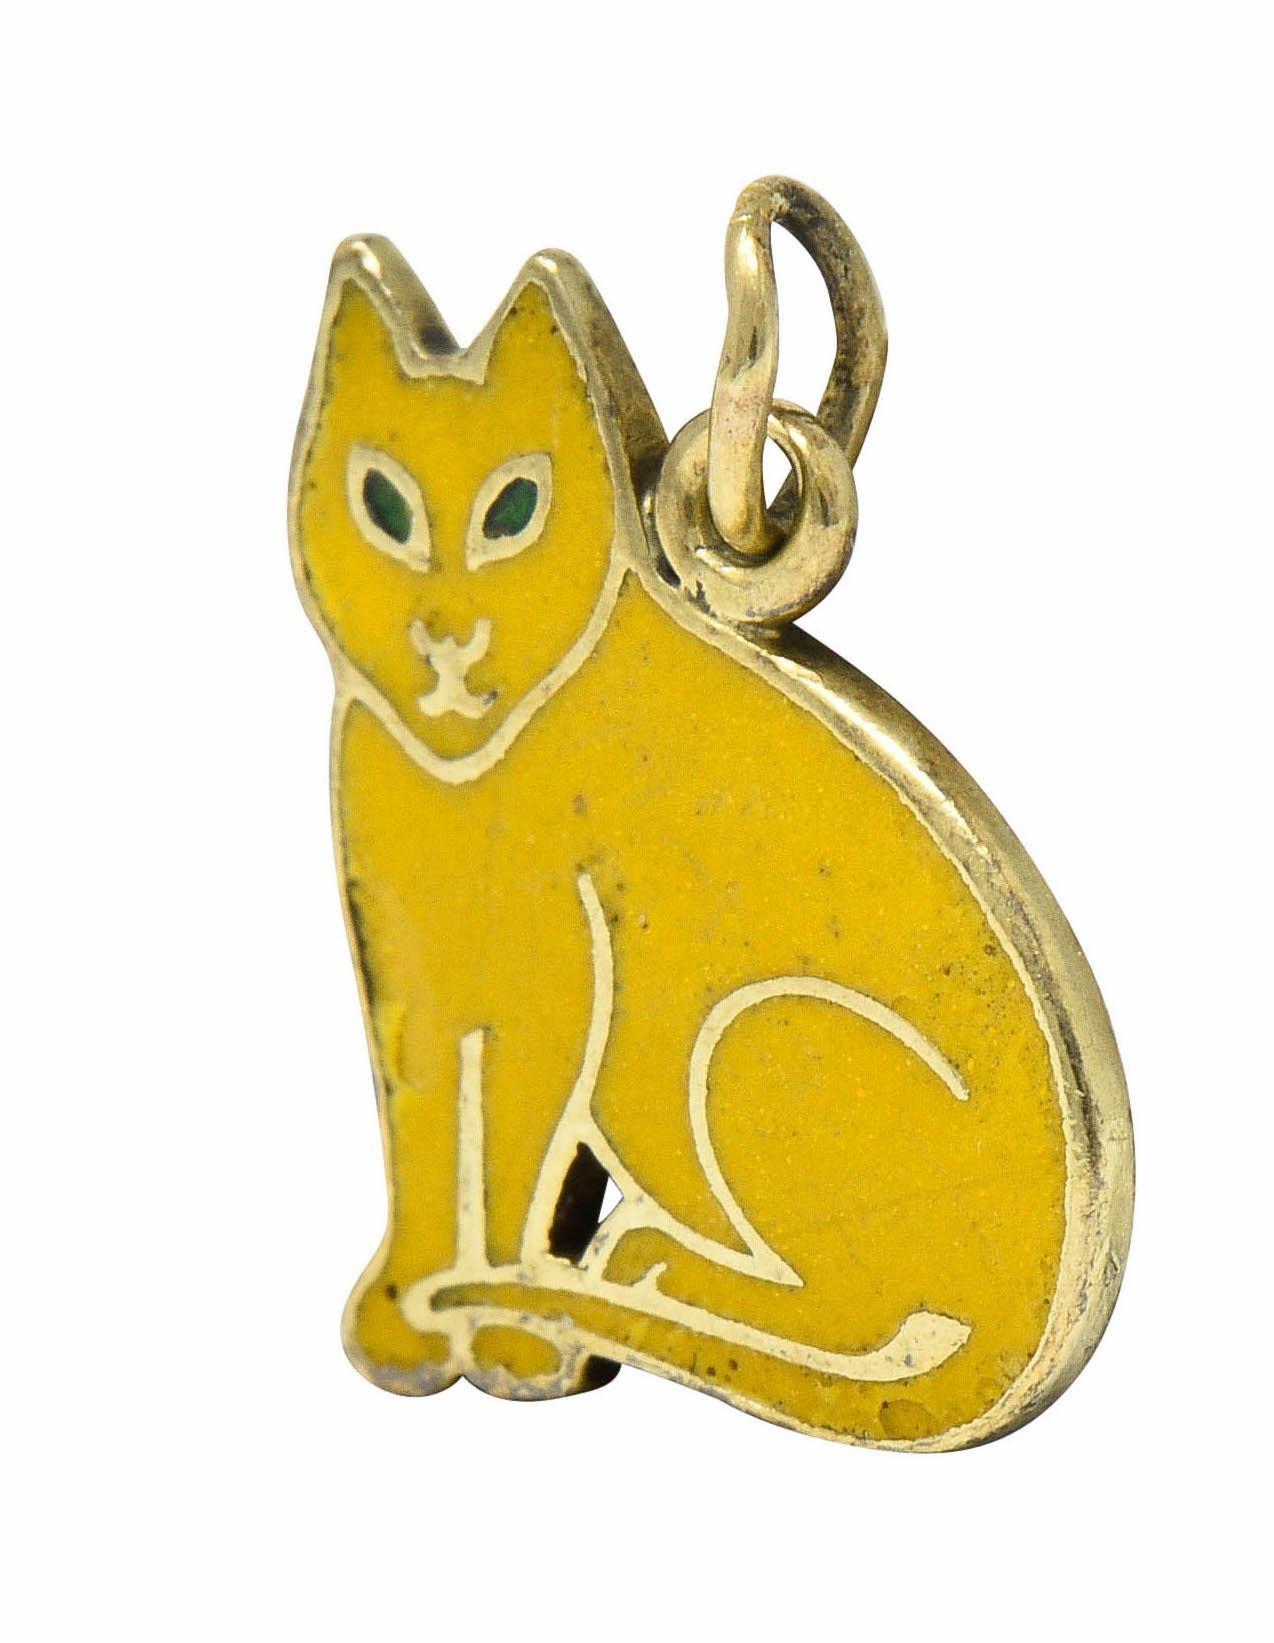 Charm is designed as a stylized cat glossed with yellow enamel, exhibiting minimal loss

With a pointed face and bright green enamel eyes

Depiction is featured on both sides of charm

Tested as 14 karat gold

Circa: 1930

Measures: 3/8 x 1/2